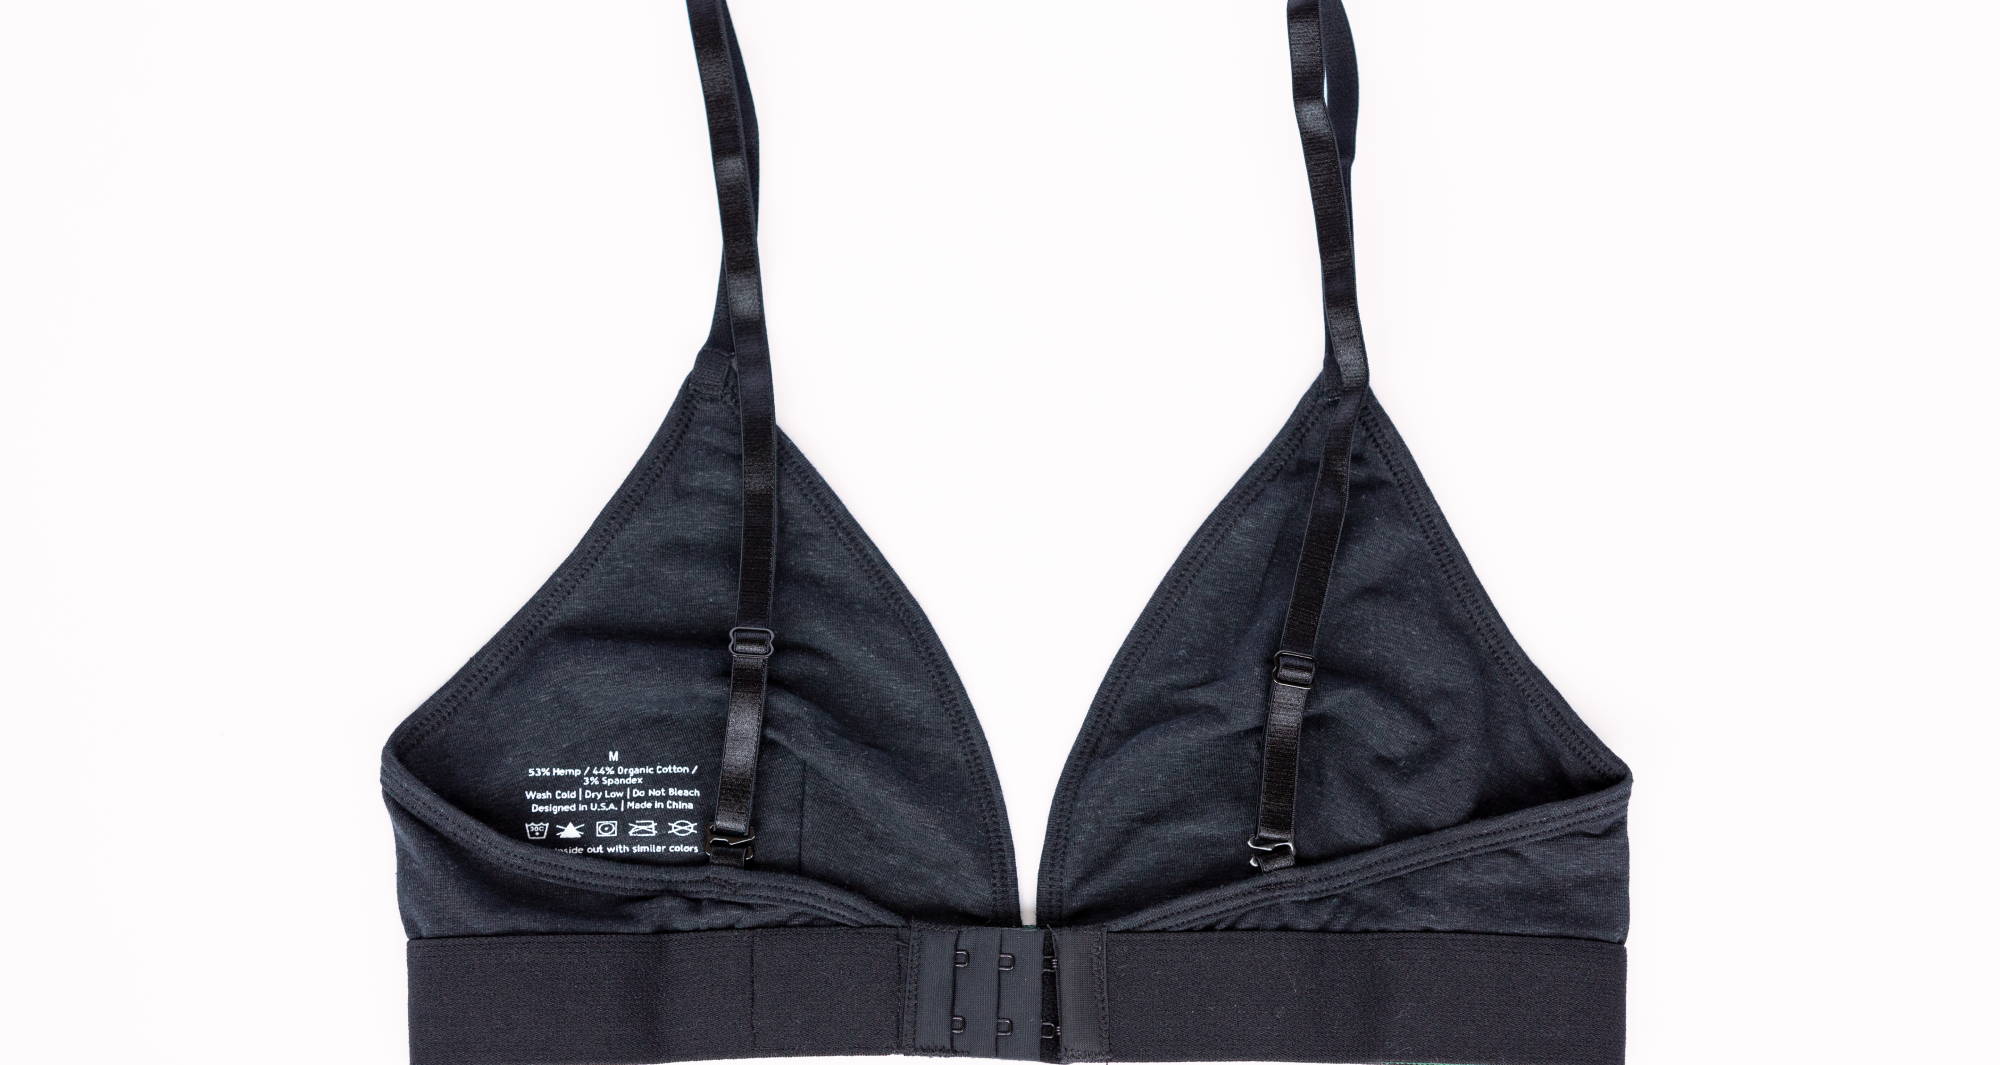 Best of How to undo front clasp bras